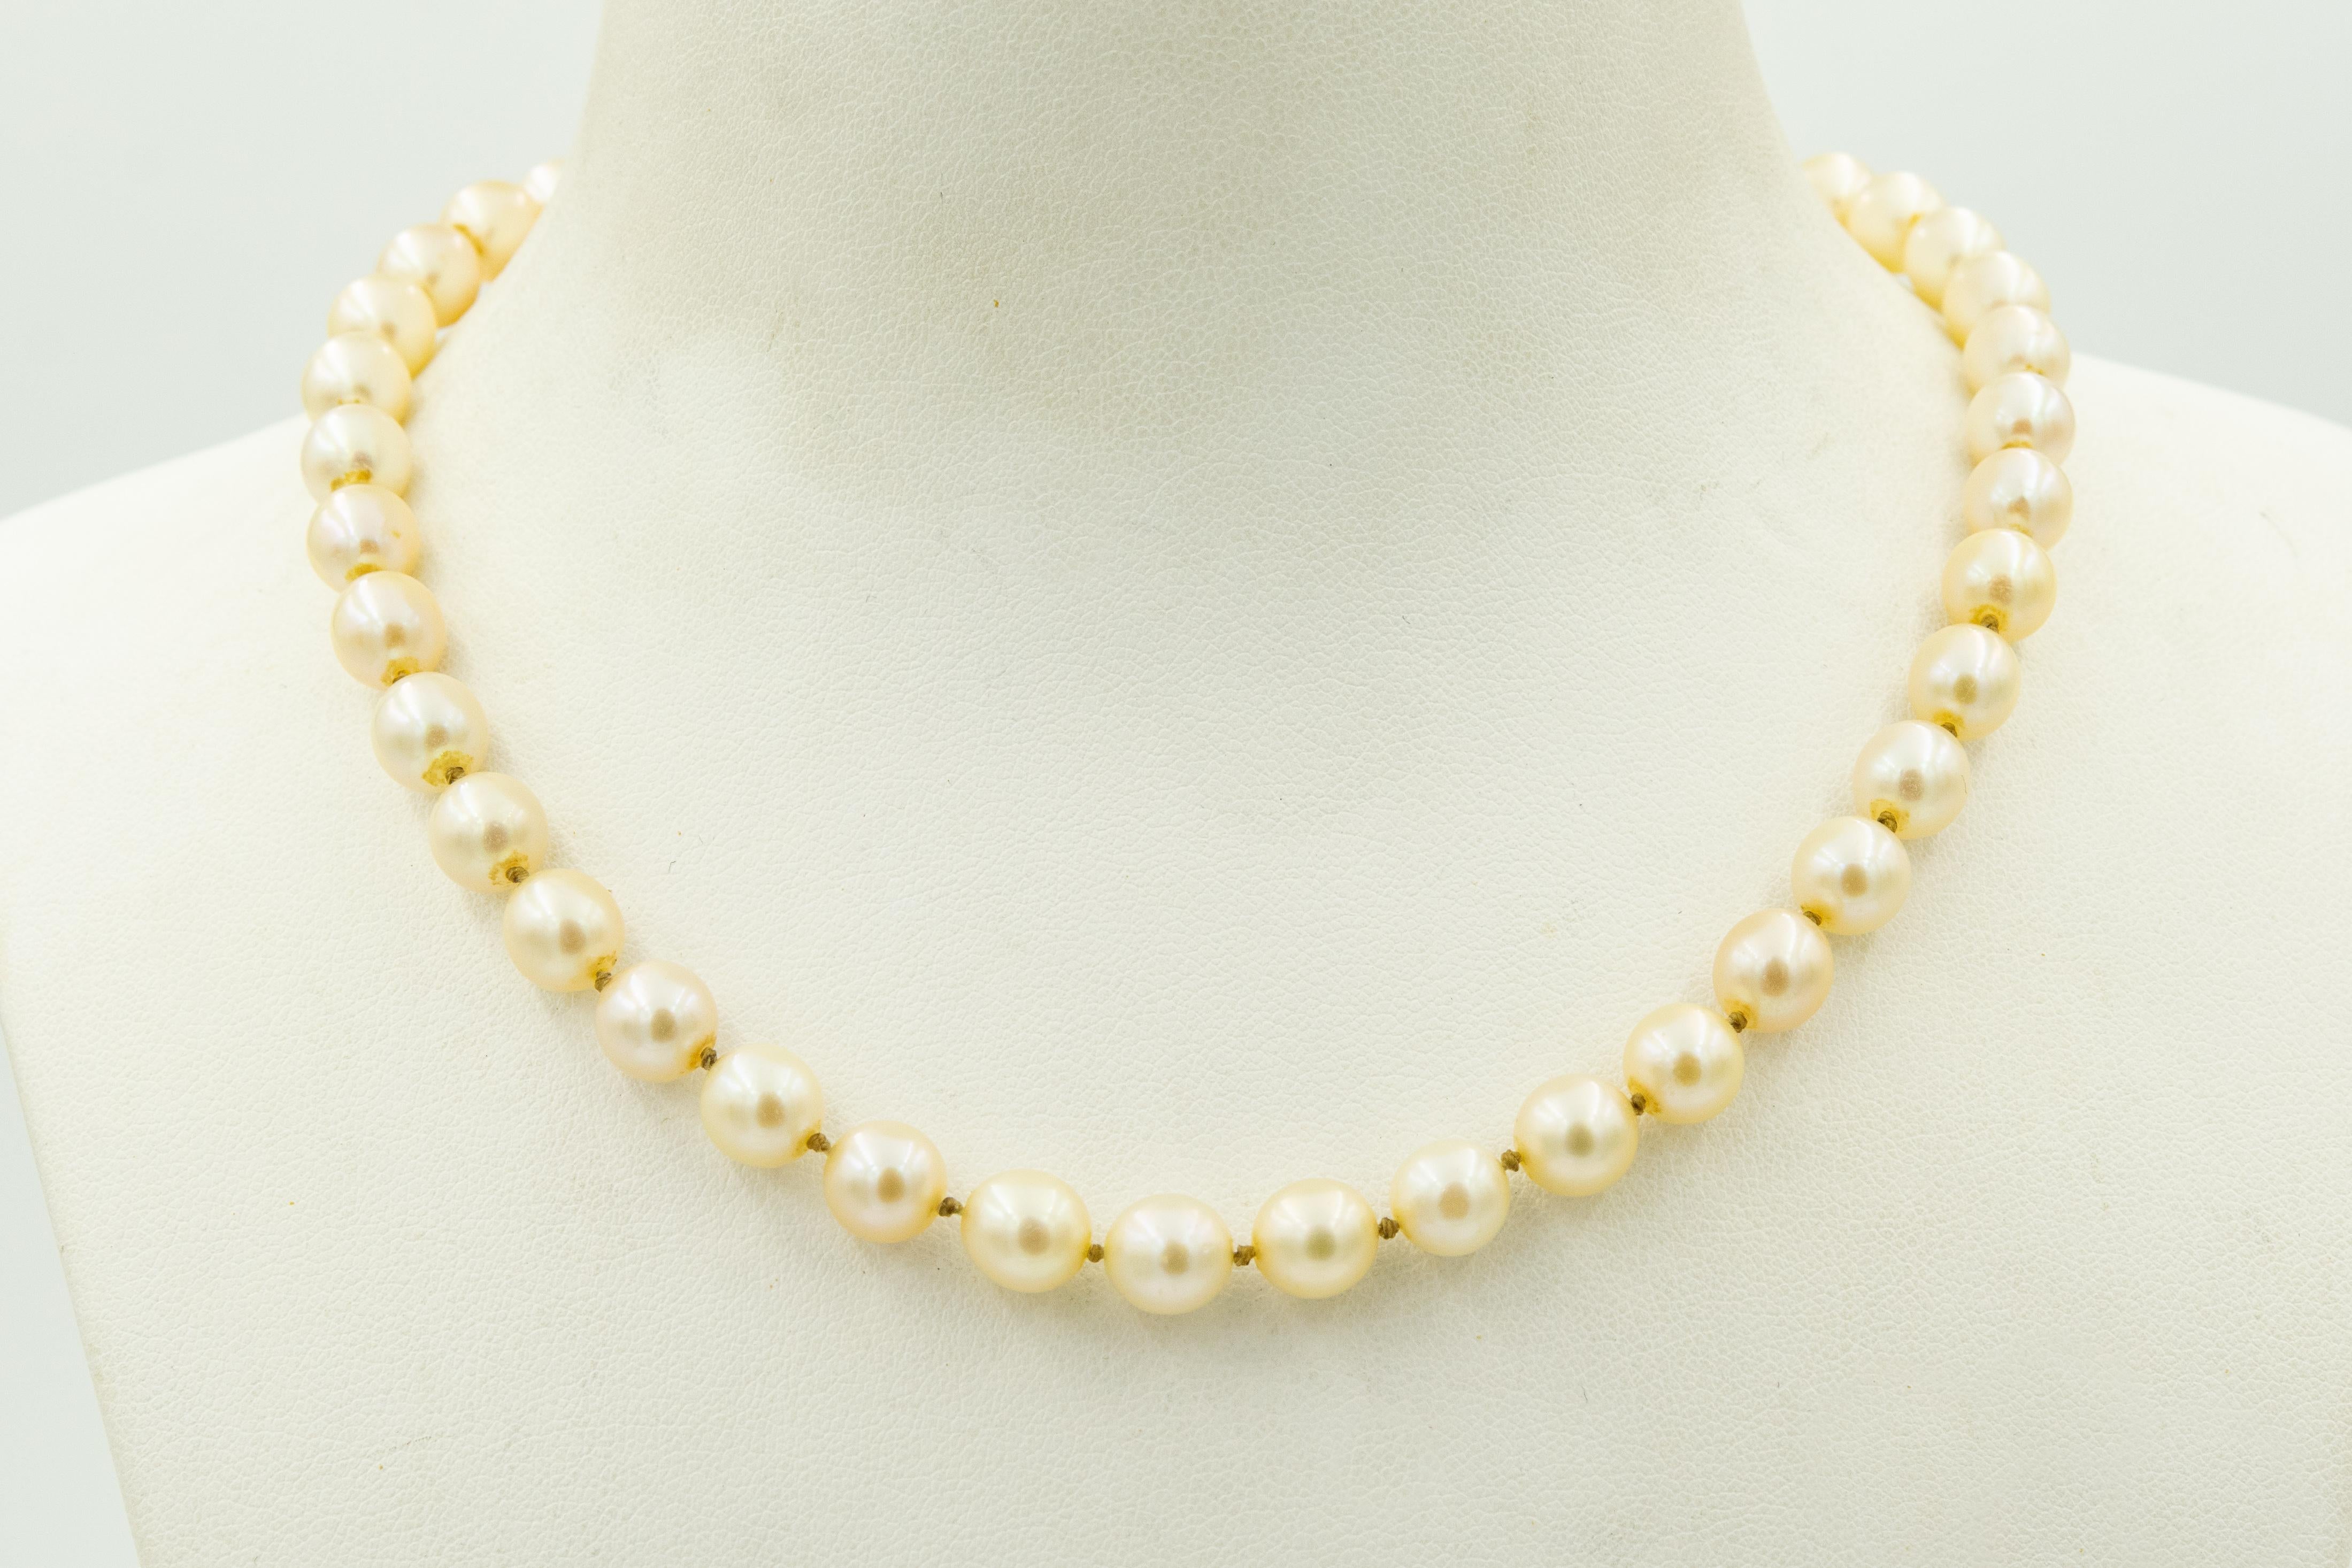 Classic mid century cultured pearl necklace featuring a strand of 7.3 mm pearls (approximate some variation).  The strand is knotted between each pearl.  The clasp is a cluster of pearls raise up a bit like a dome.  To open it you push down on the